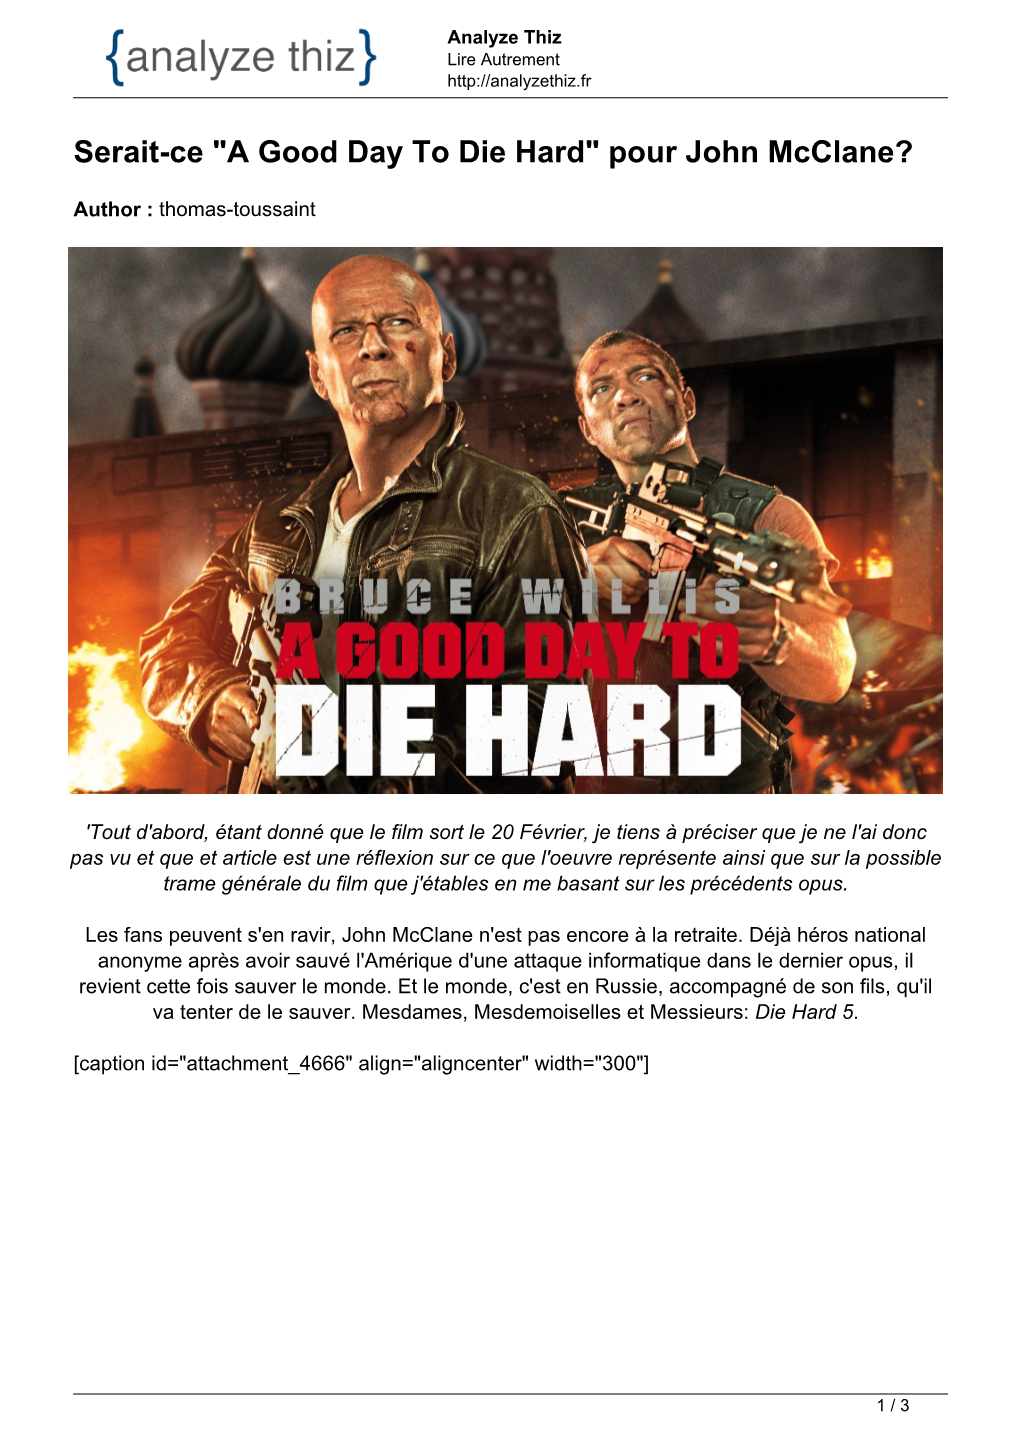 A Good Day to Die Hard" Pour John Mcclane?